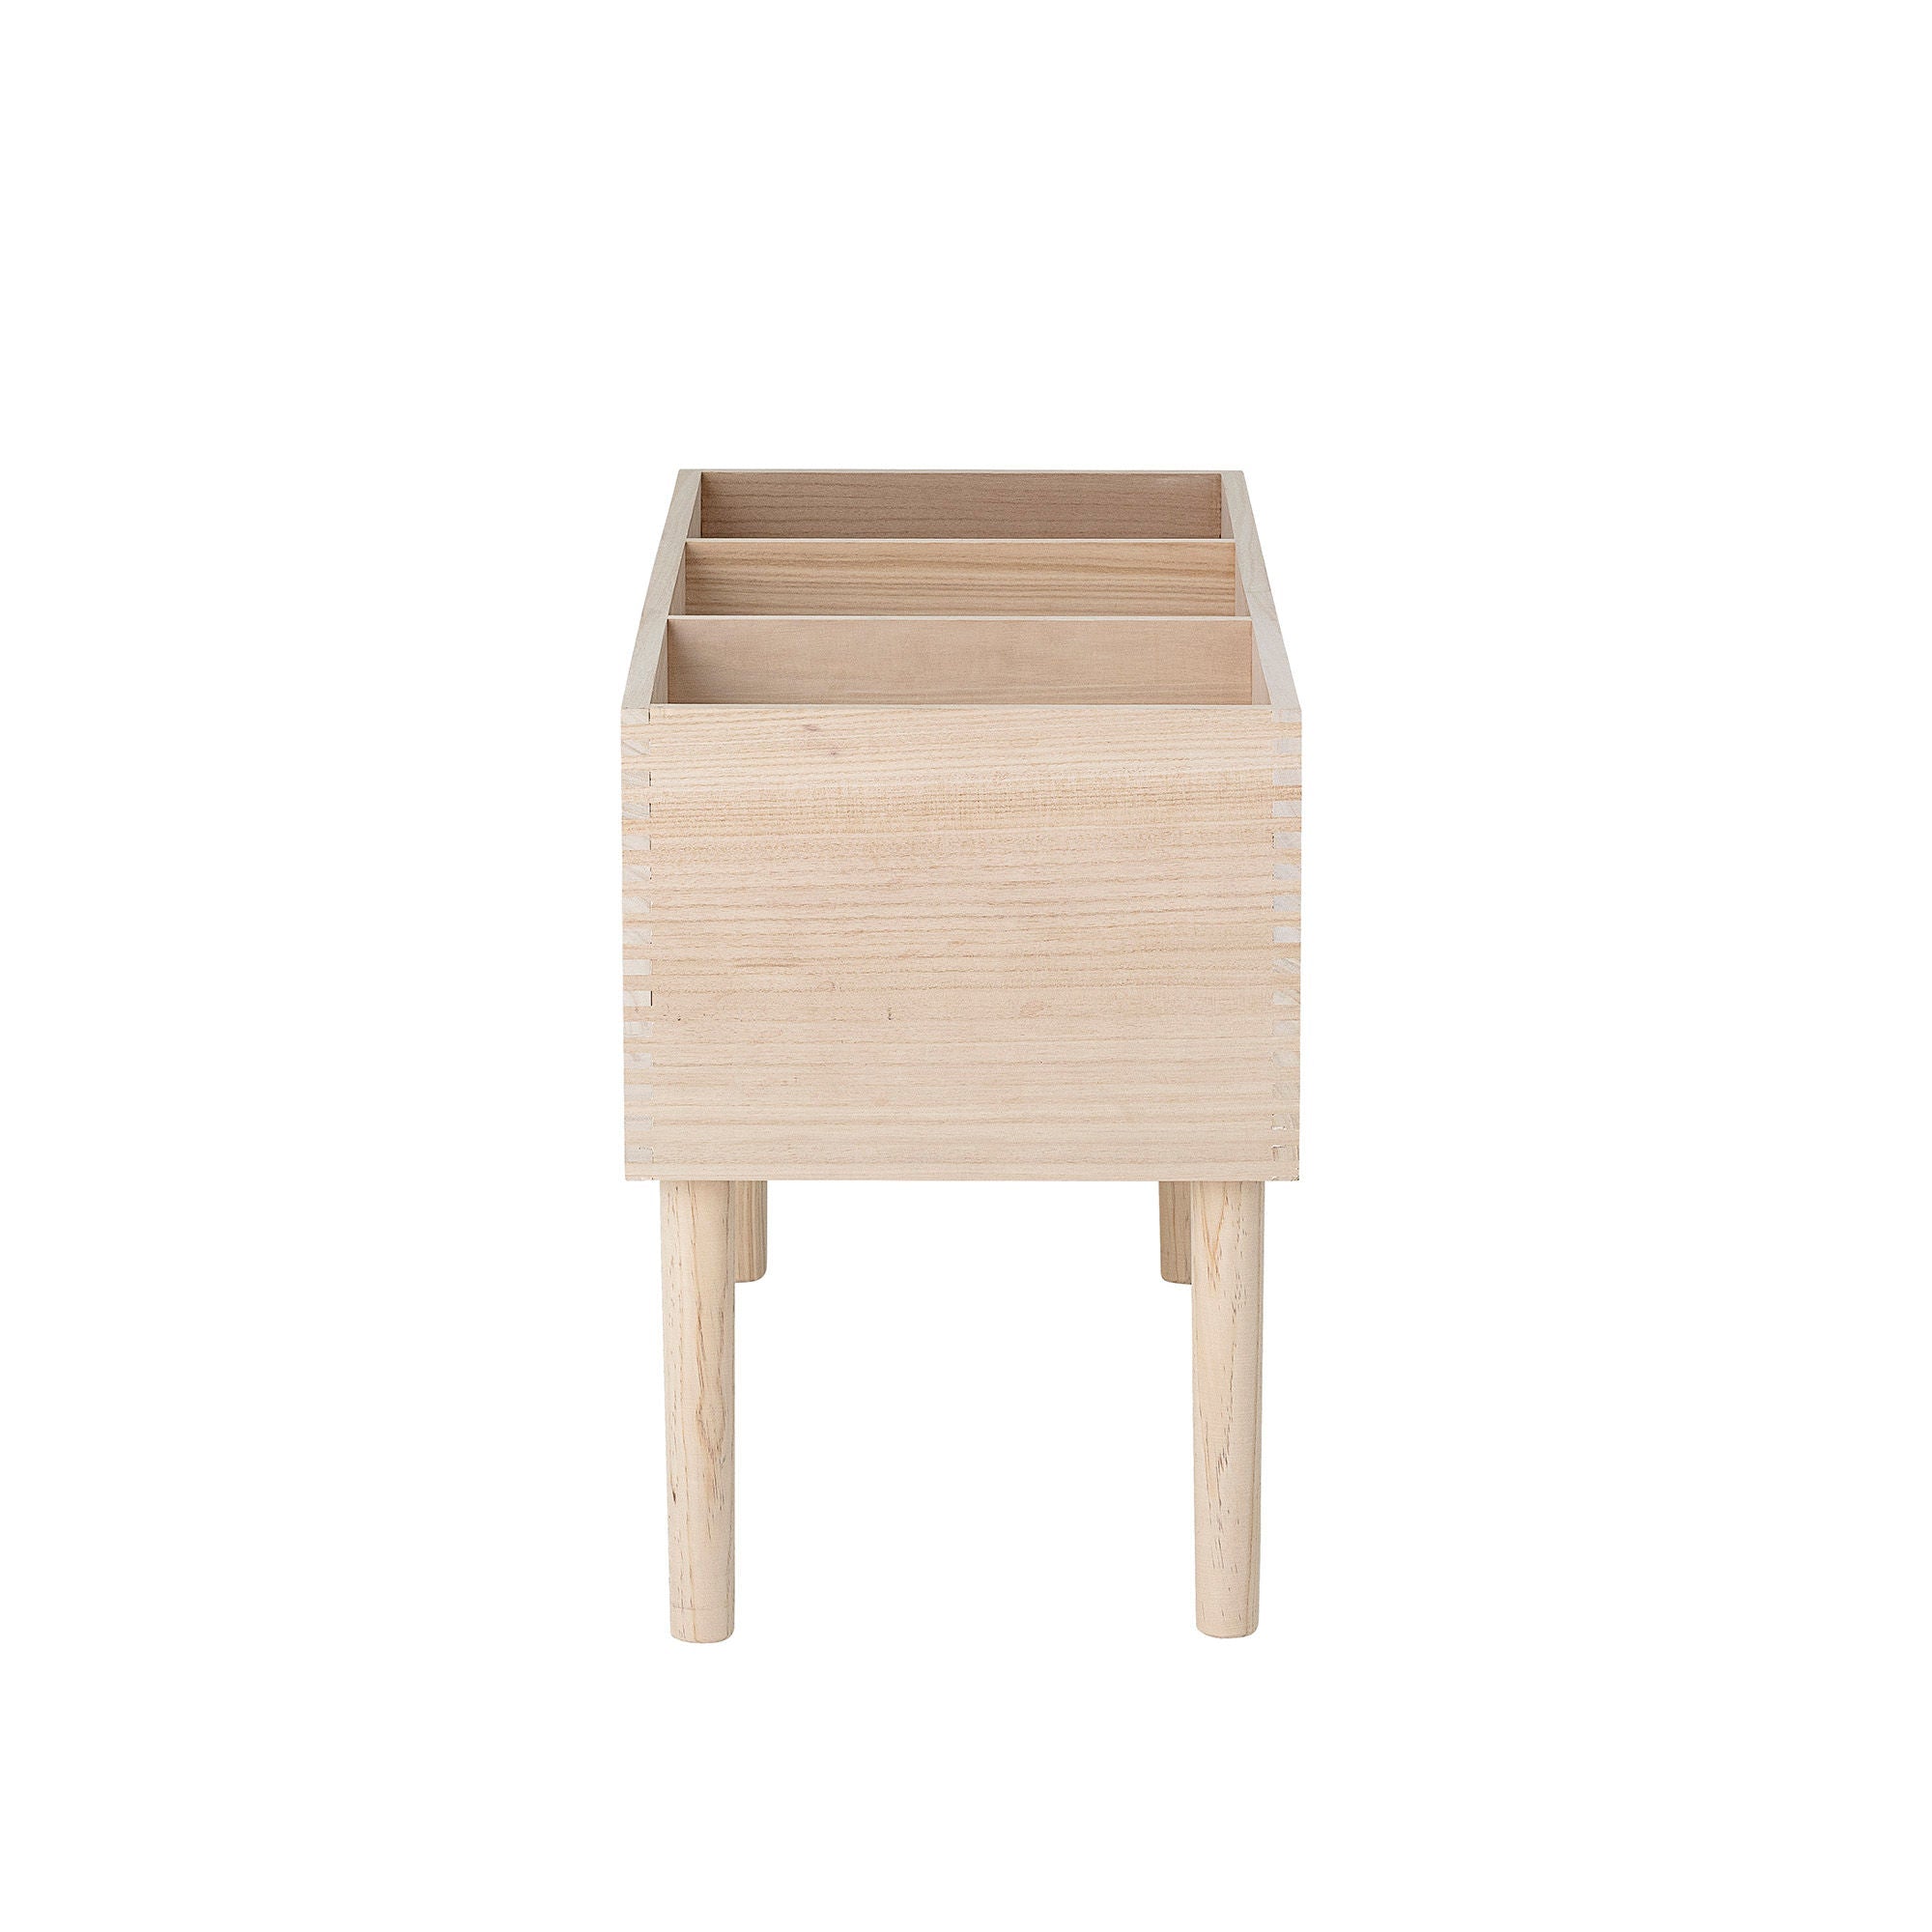 Bloomingville Douve Book Stand, Nature, Paulownia